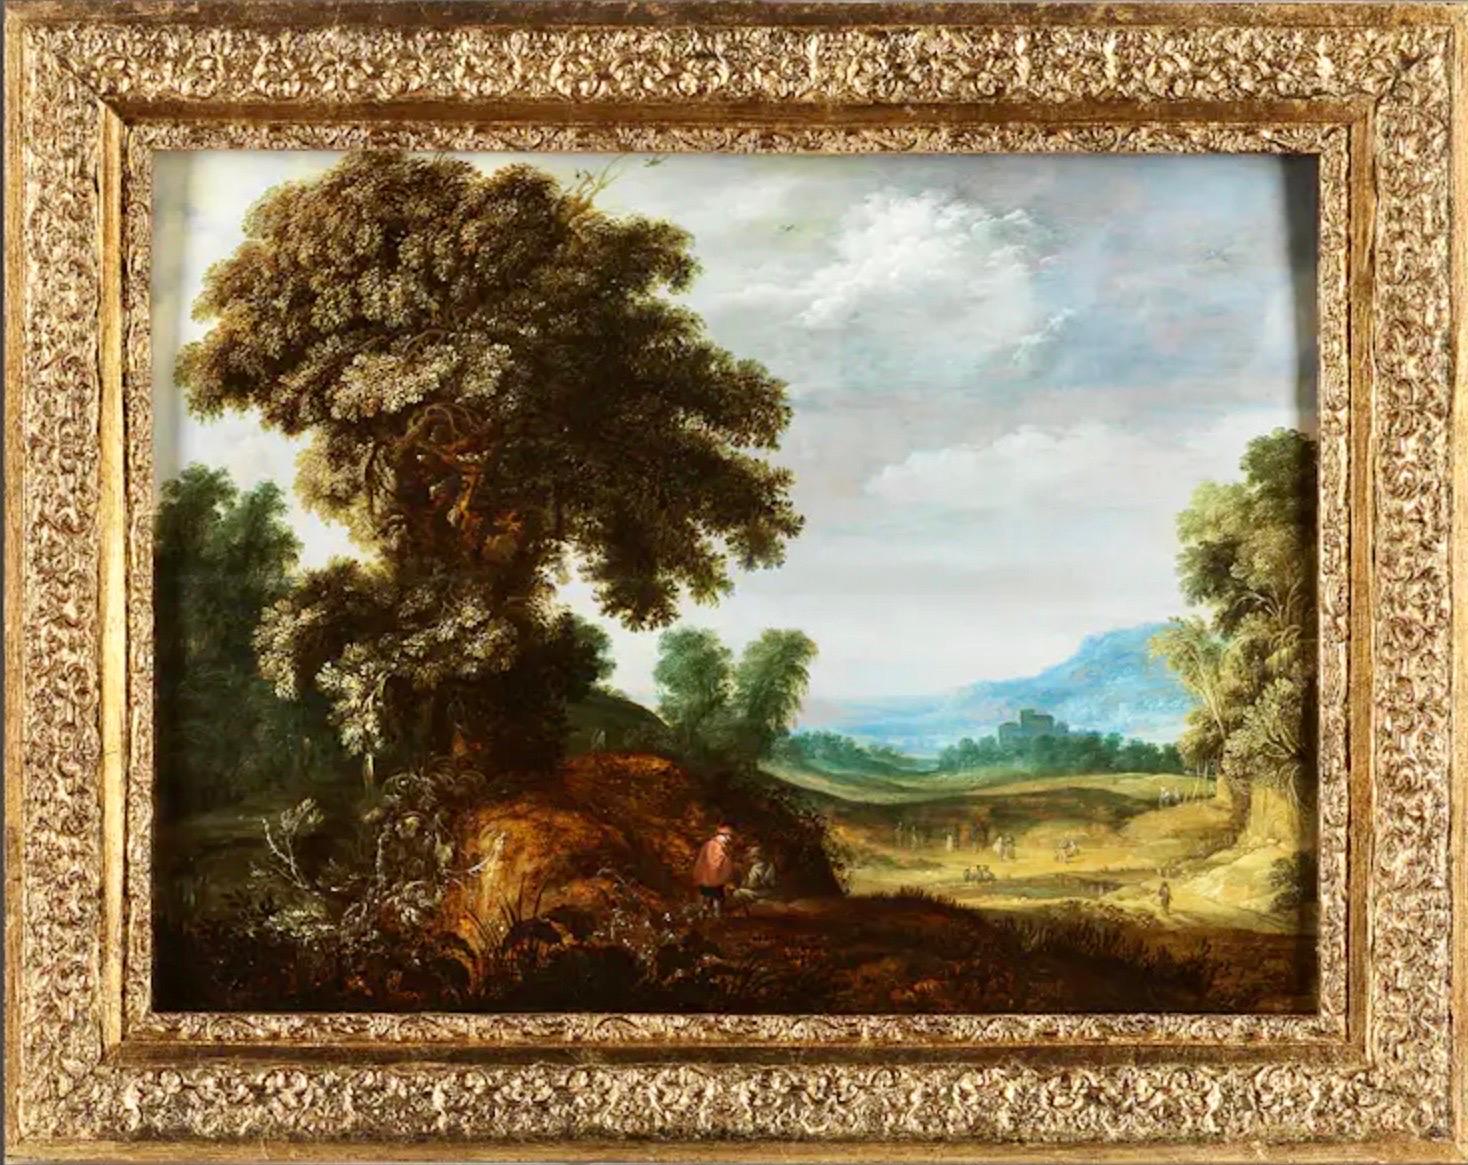 17th century Flemish Old Master painting - Vast landscape with a majestic oak - Old Masters Painting by Alexander Keirincx